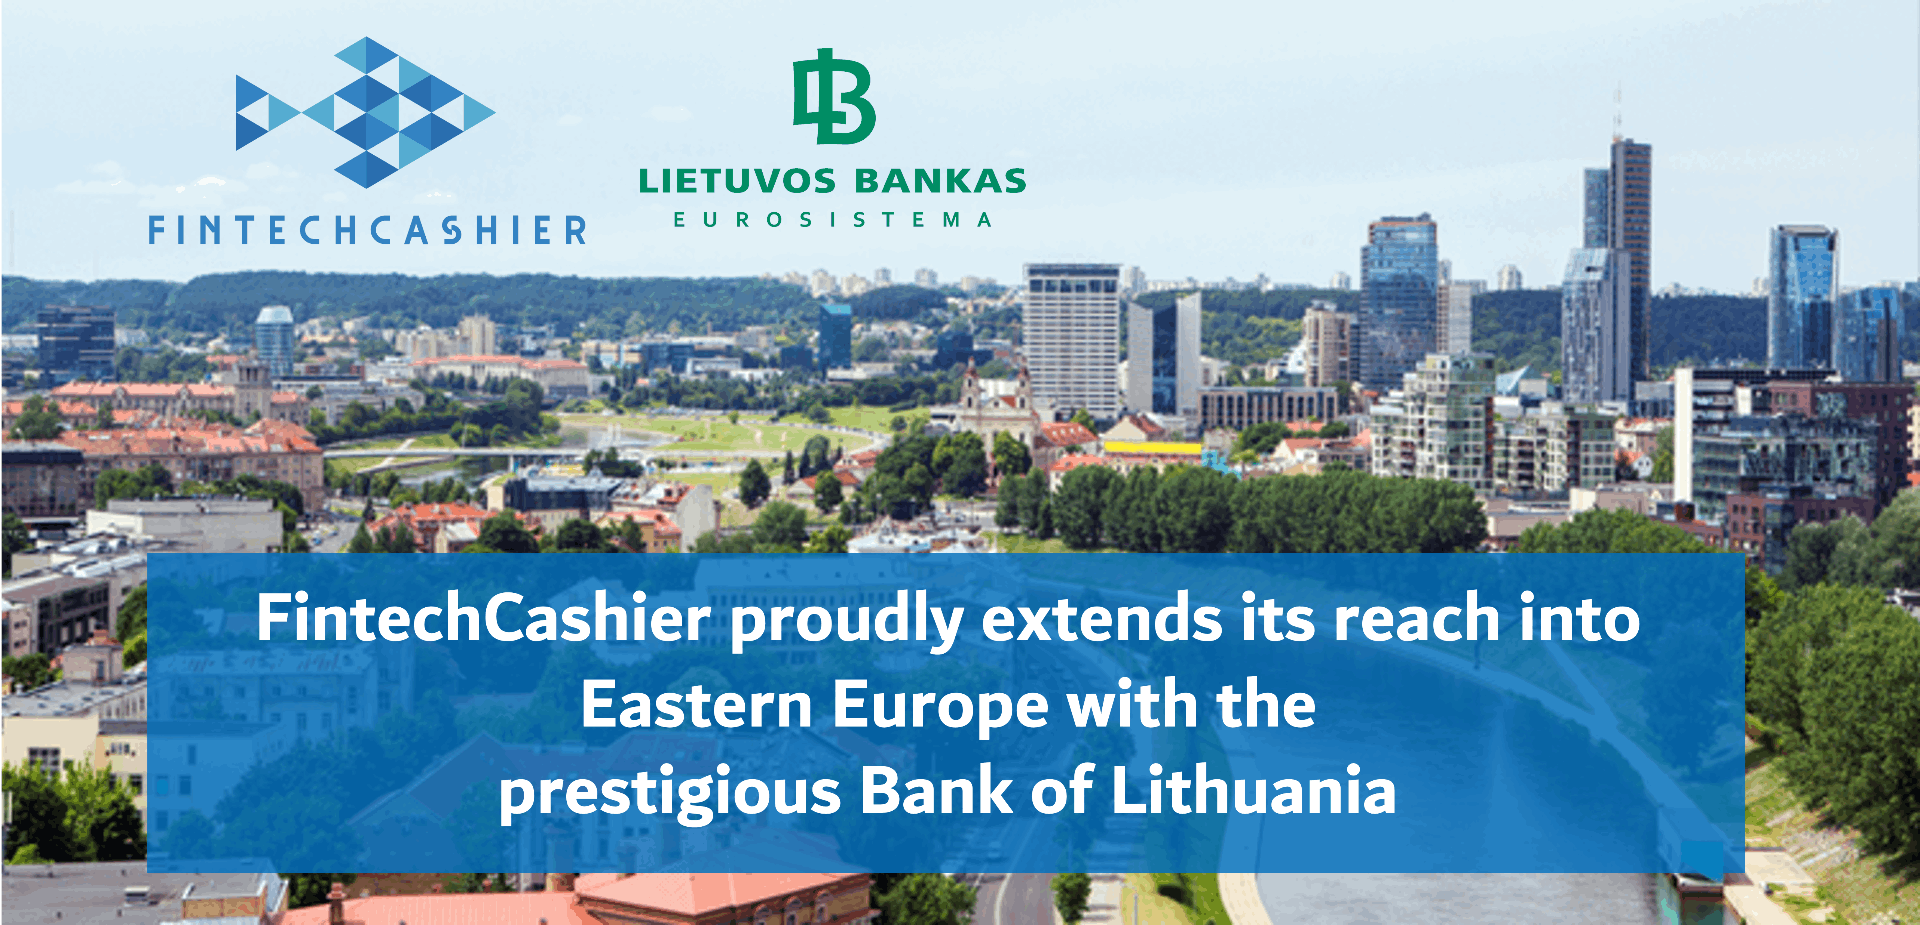 Bank of Lithuania Partnership Announcement